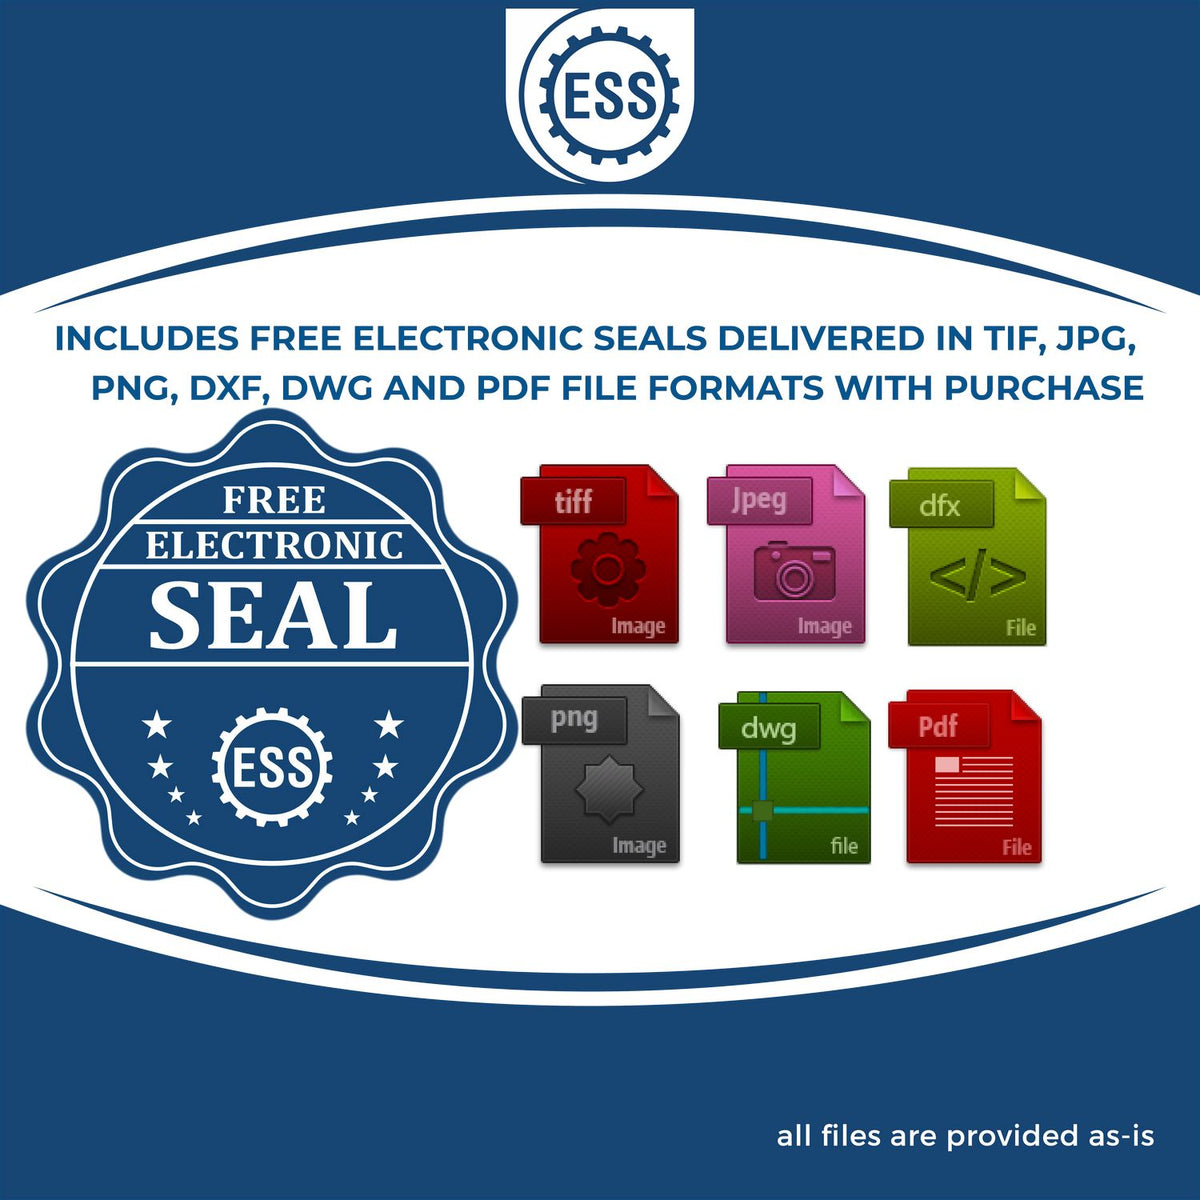 An infographic for the free electronic seal for the Premium MaxLight Pre-Inked Arizona Geology Stamp illustrating the different file type icons such as DXF, DWG, TIF, JPG and PNG.